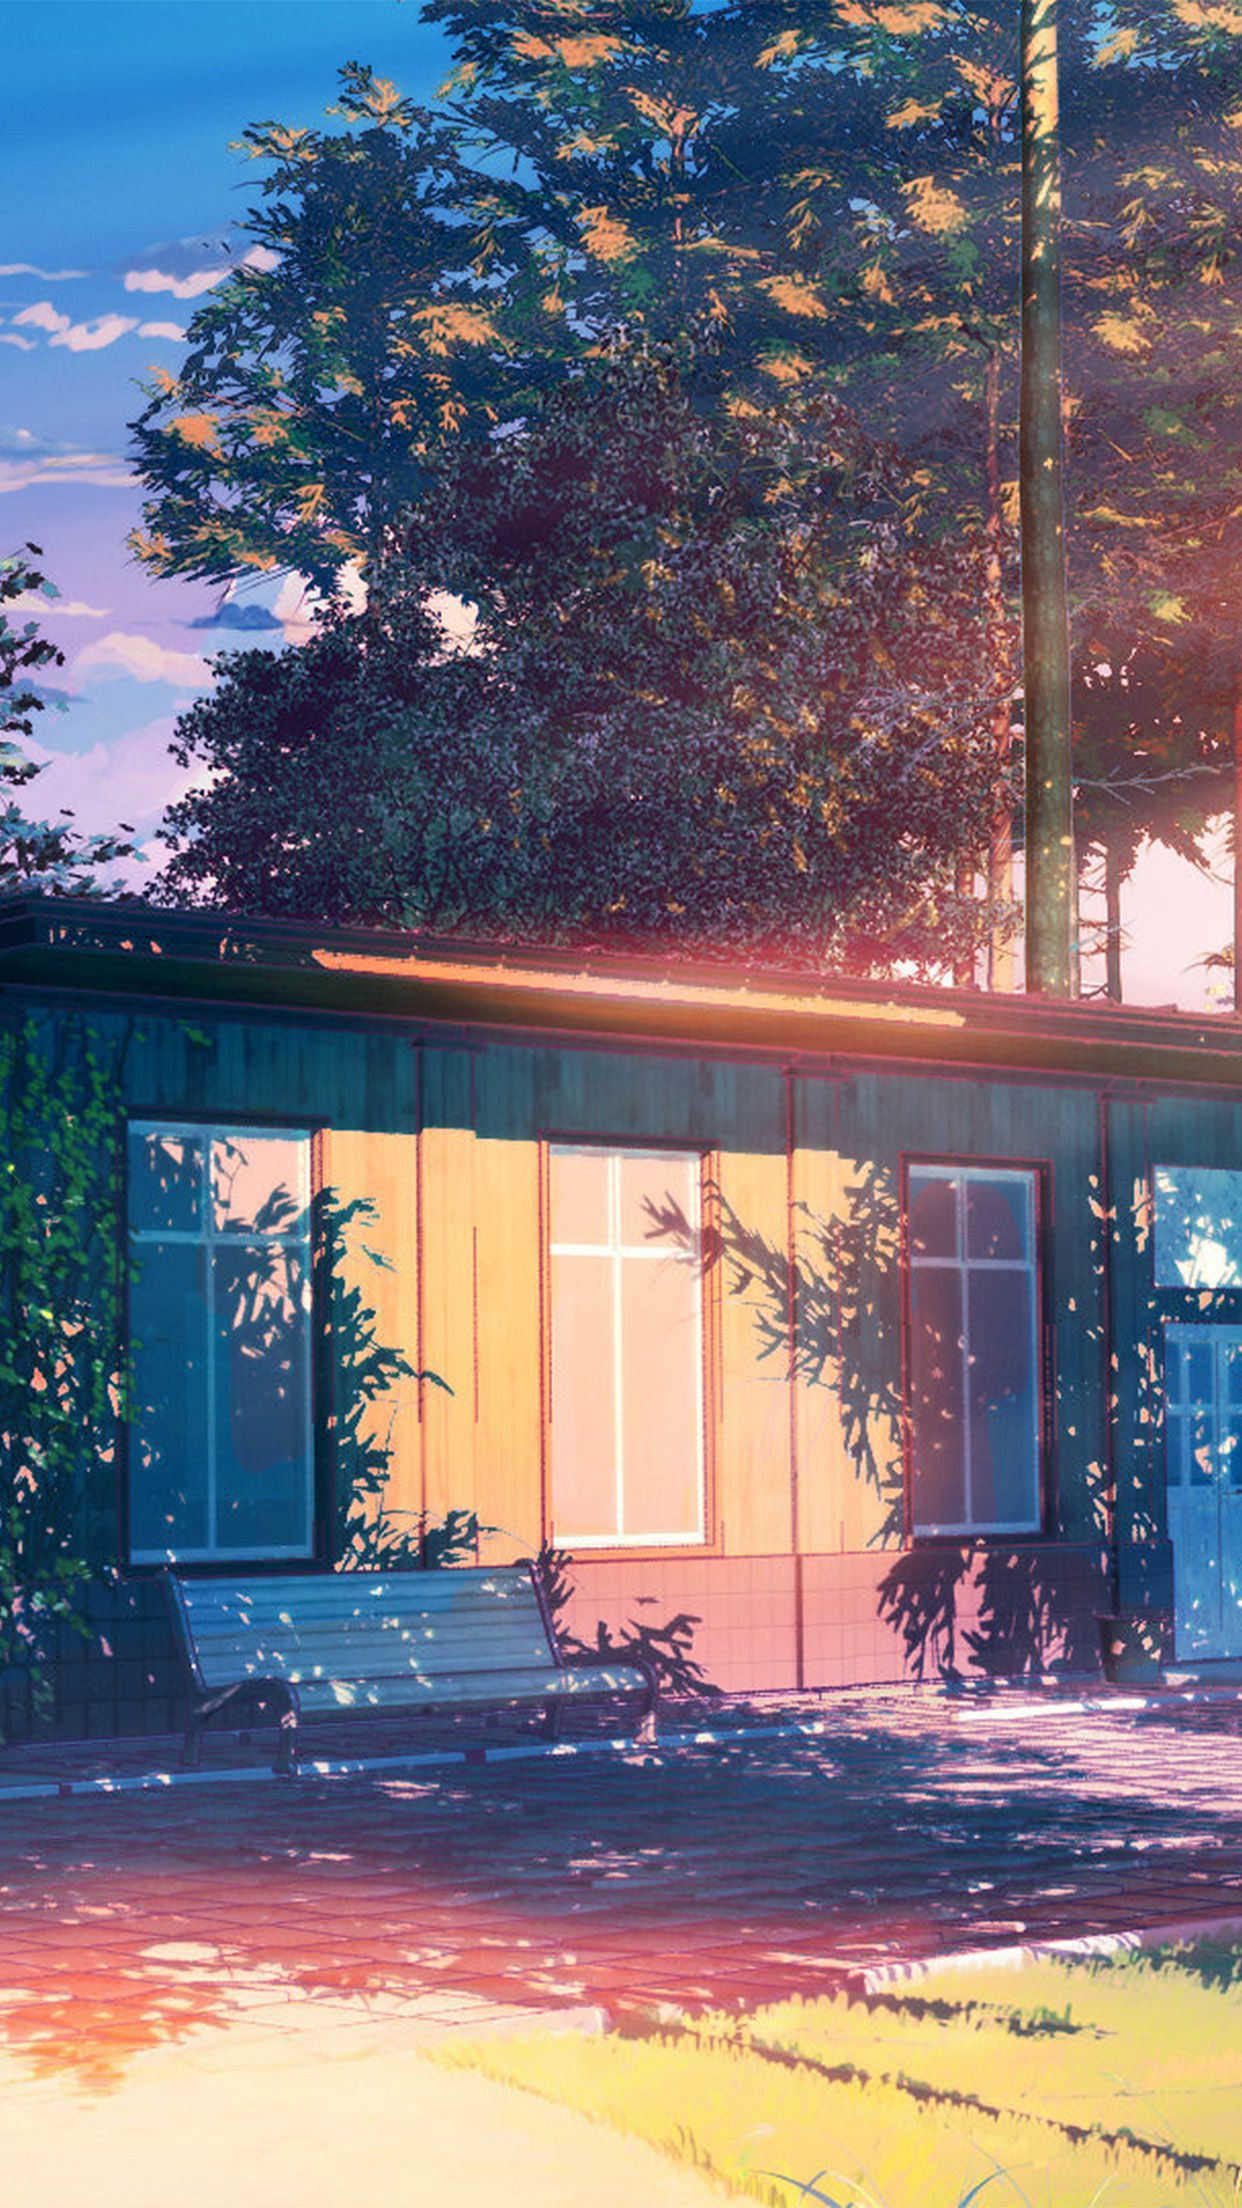 Aesthetic anime house in the forest wallpaper - Camping